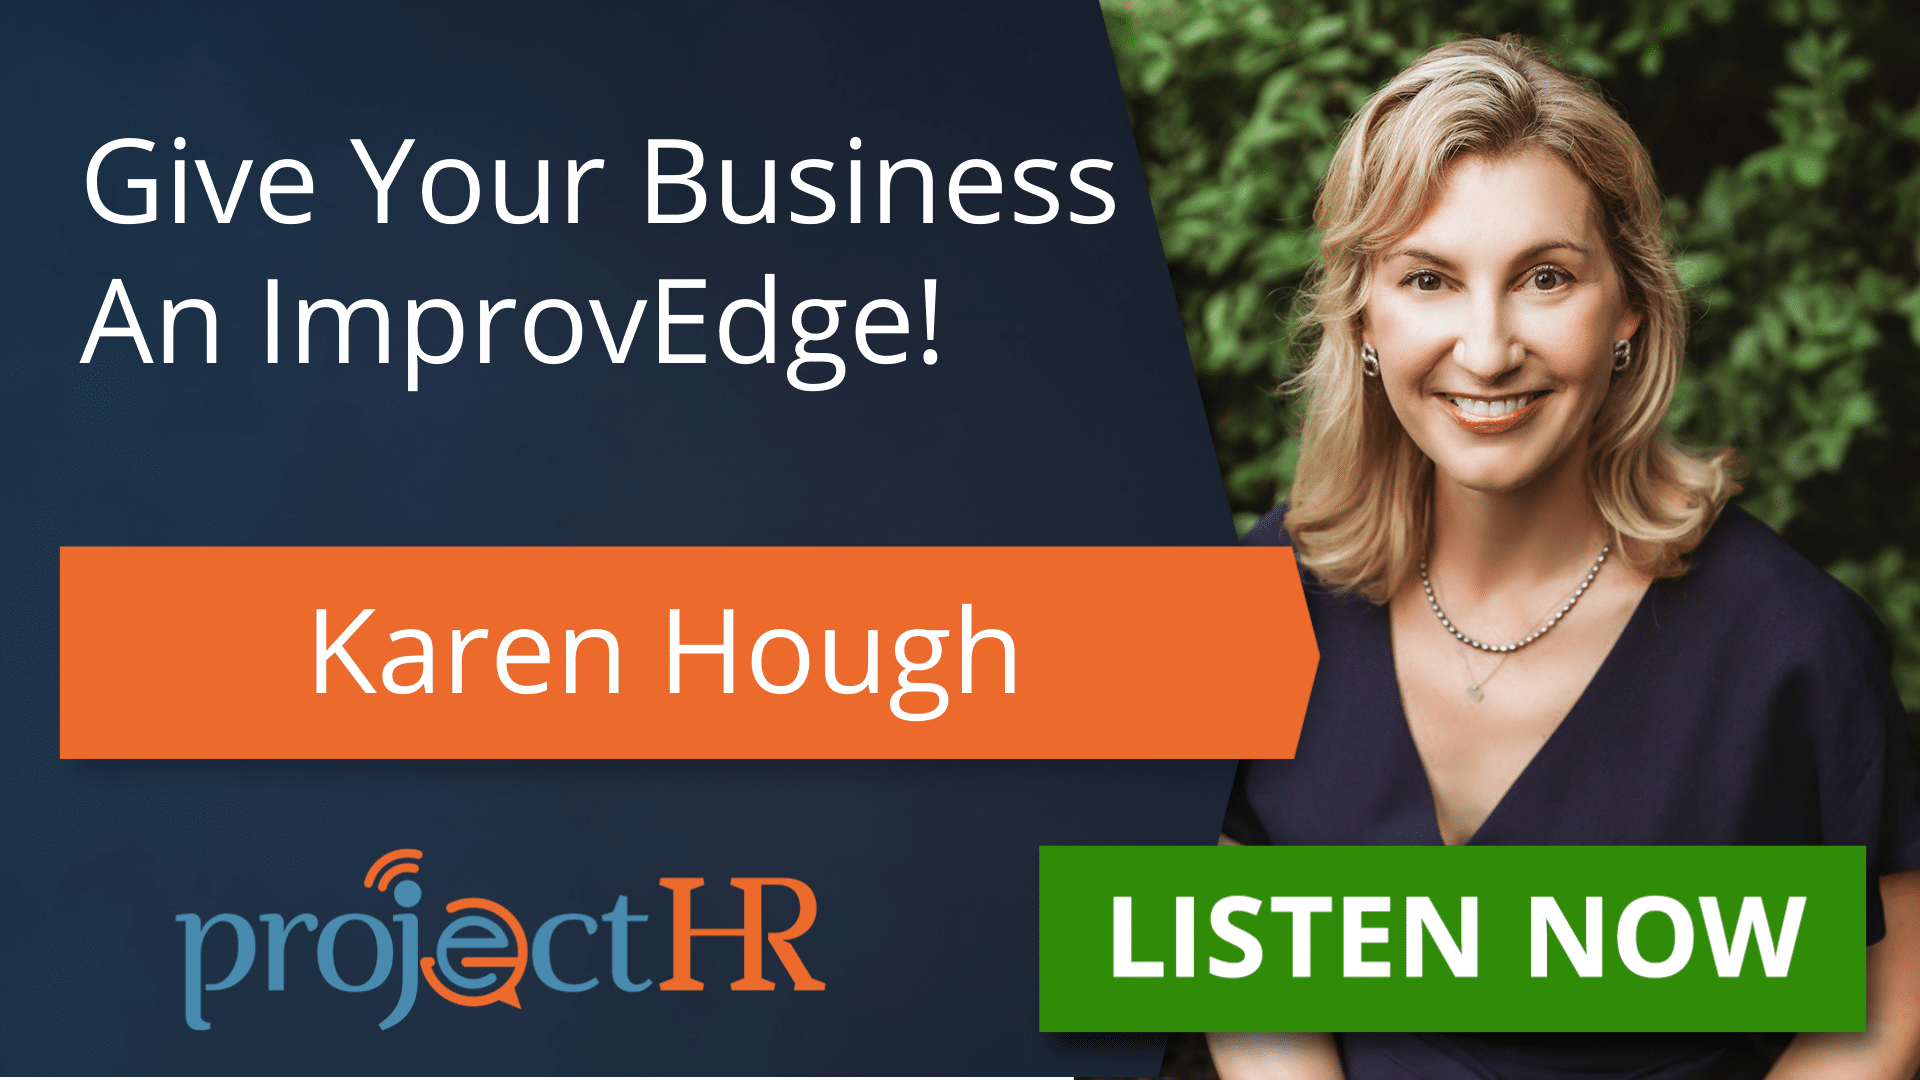 Podcast episode on teamwork in the workplace with Karen Hough